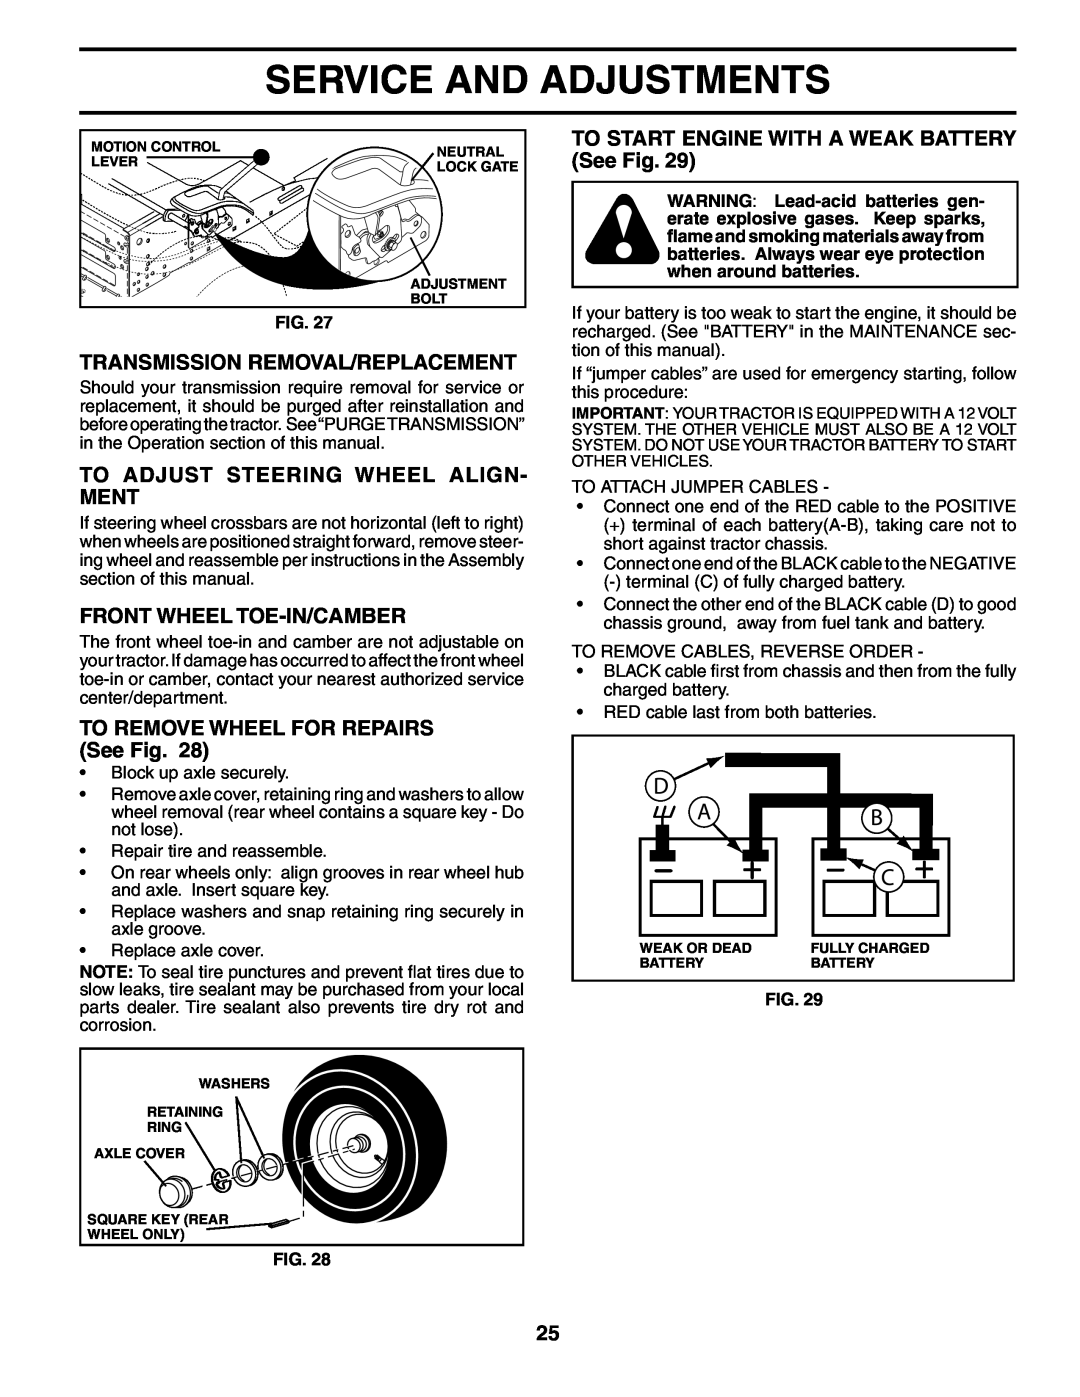 Poulan 195032 manual Transmission Removal/Replacement, To Adjust Steering Wheel Align- Ment, Front Wheel Toe-In/Camber 